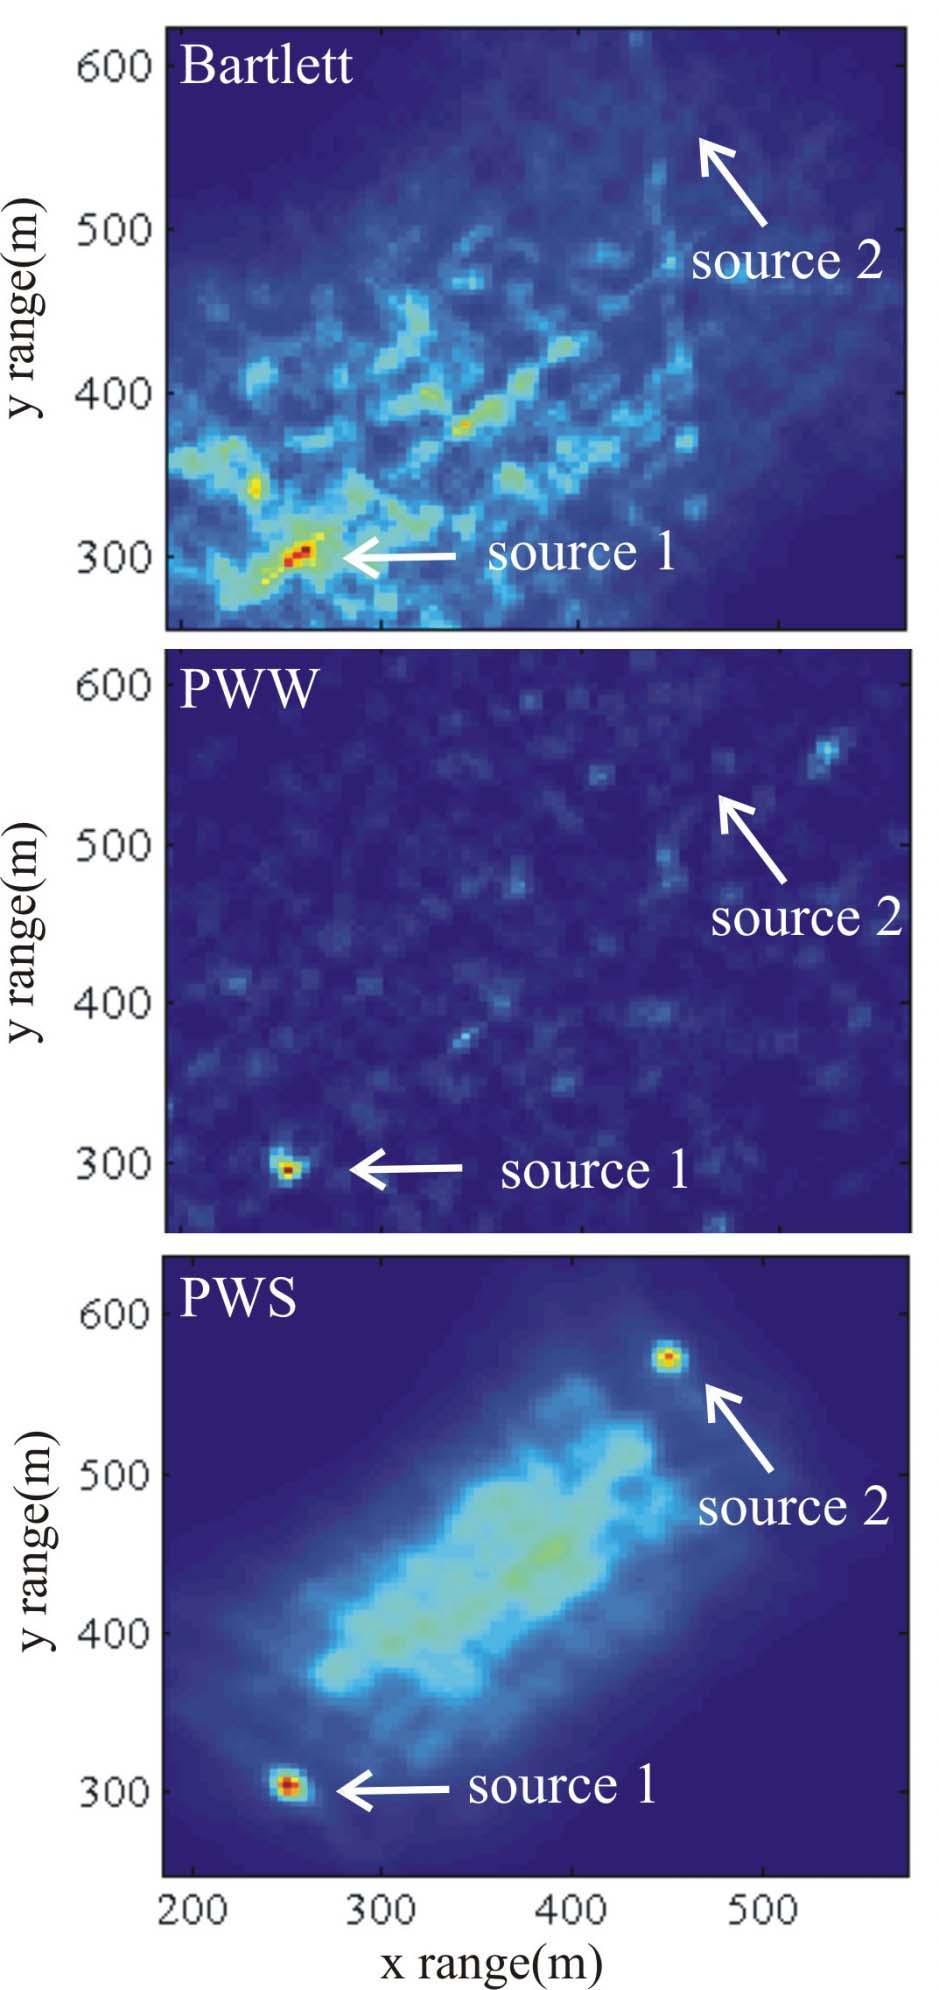 Figure 5. Ambiguity surfaces created using the Bartlett (top), PWW (middle), and PWS (bottom) processors. Data was simulated for two sources, four receivers, and signal-tonoise ratio of 0 db.